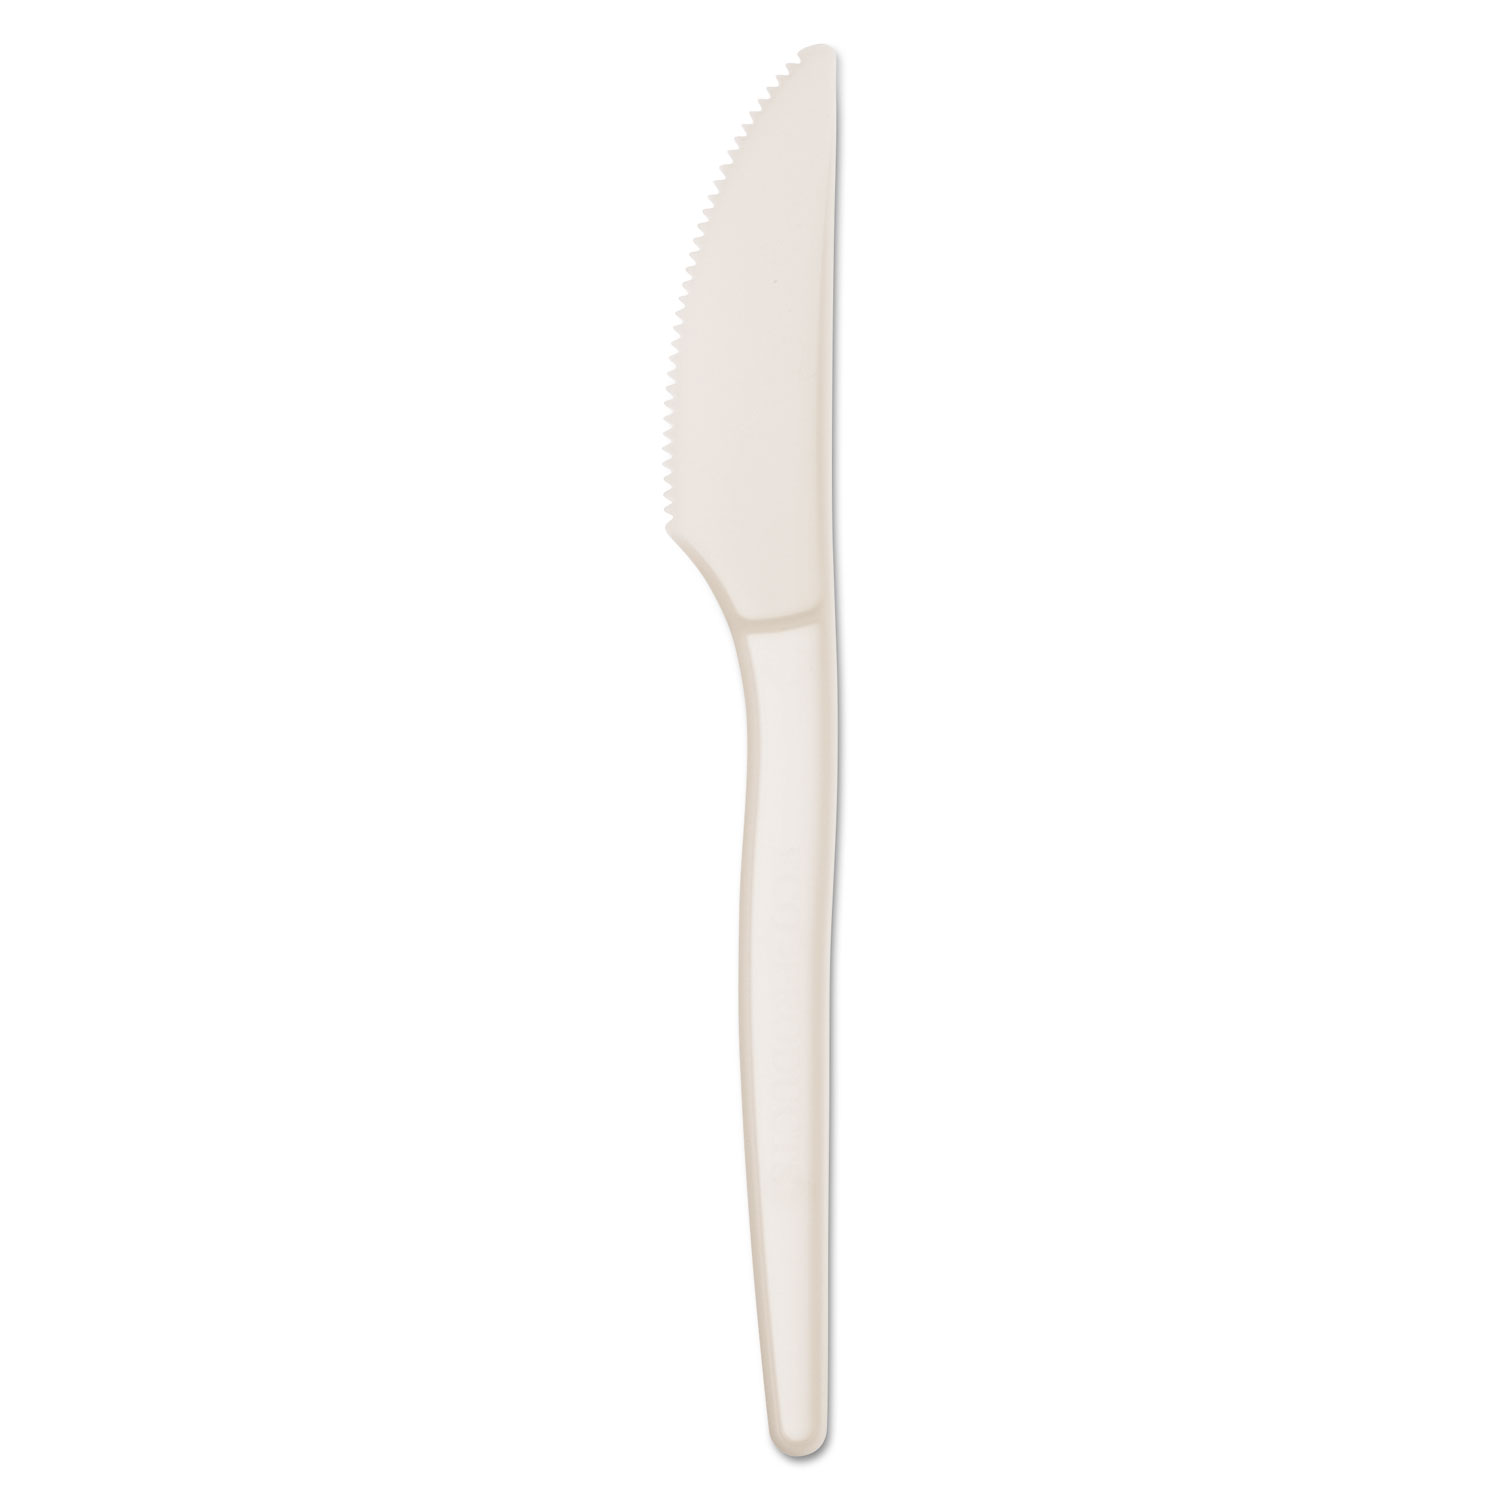  Eco-Products EP-S001 Plant Starch Knife - 7, 50/Pack, 20 Pack/Carton (ECOEPS001) 